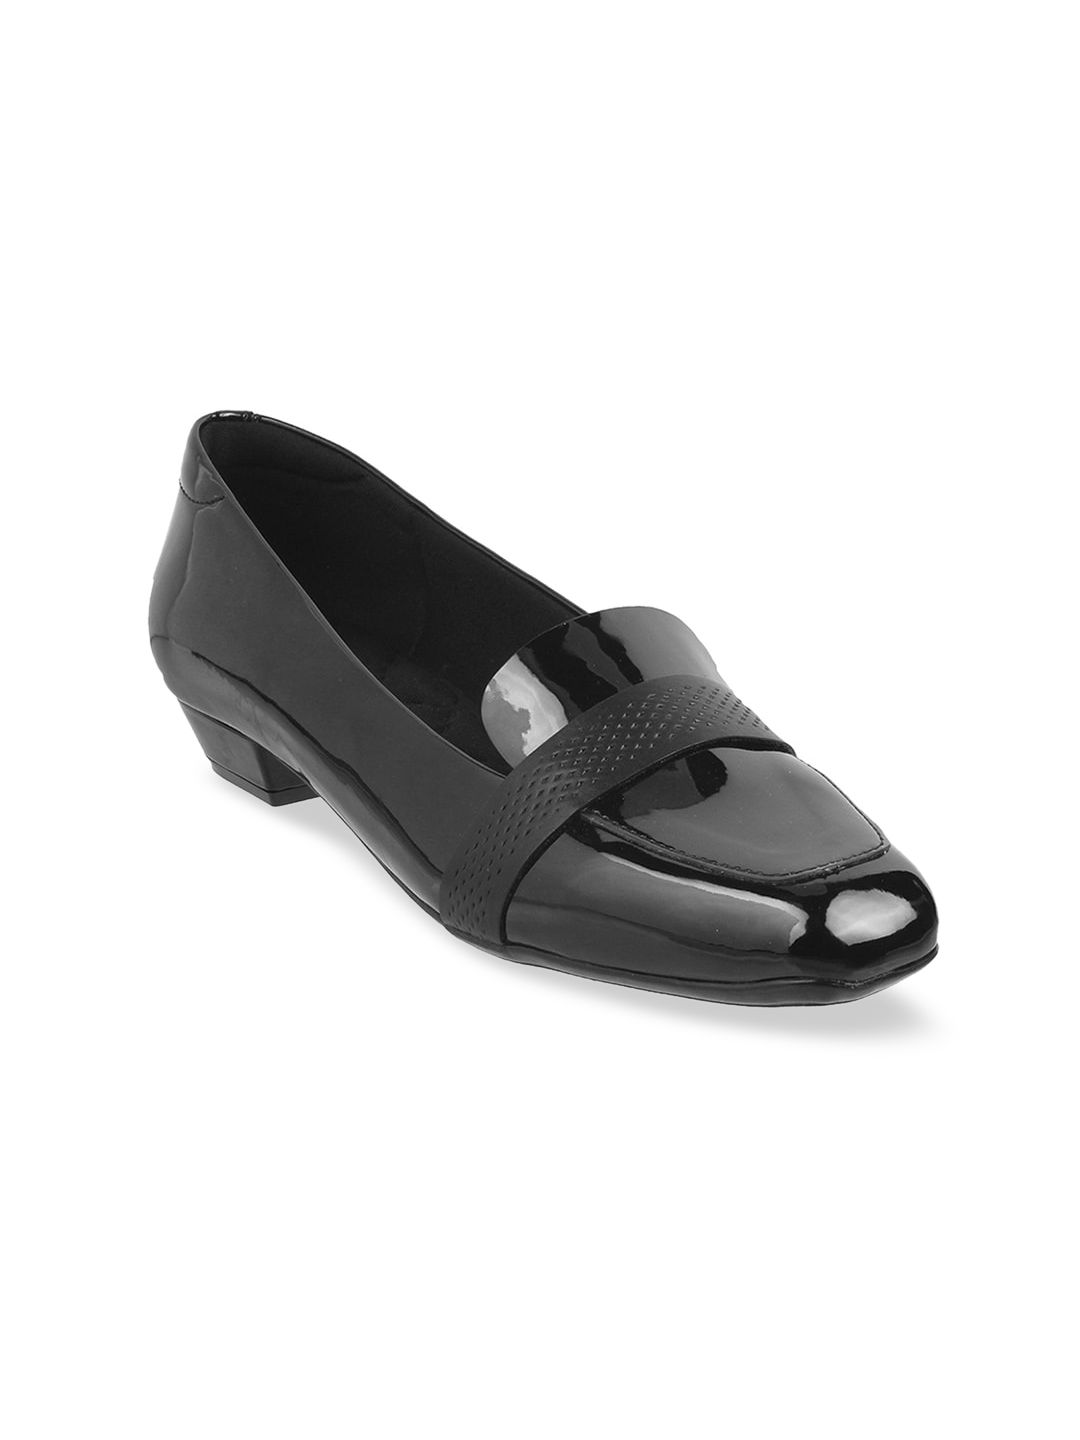 Mochi Women Black Solid Pumps Price in India